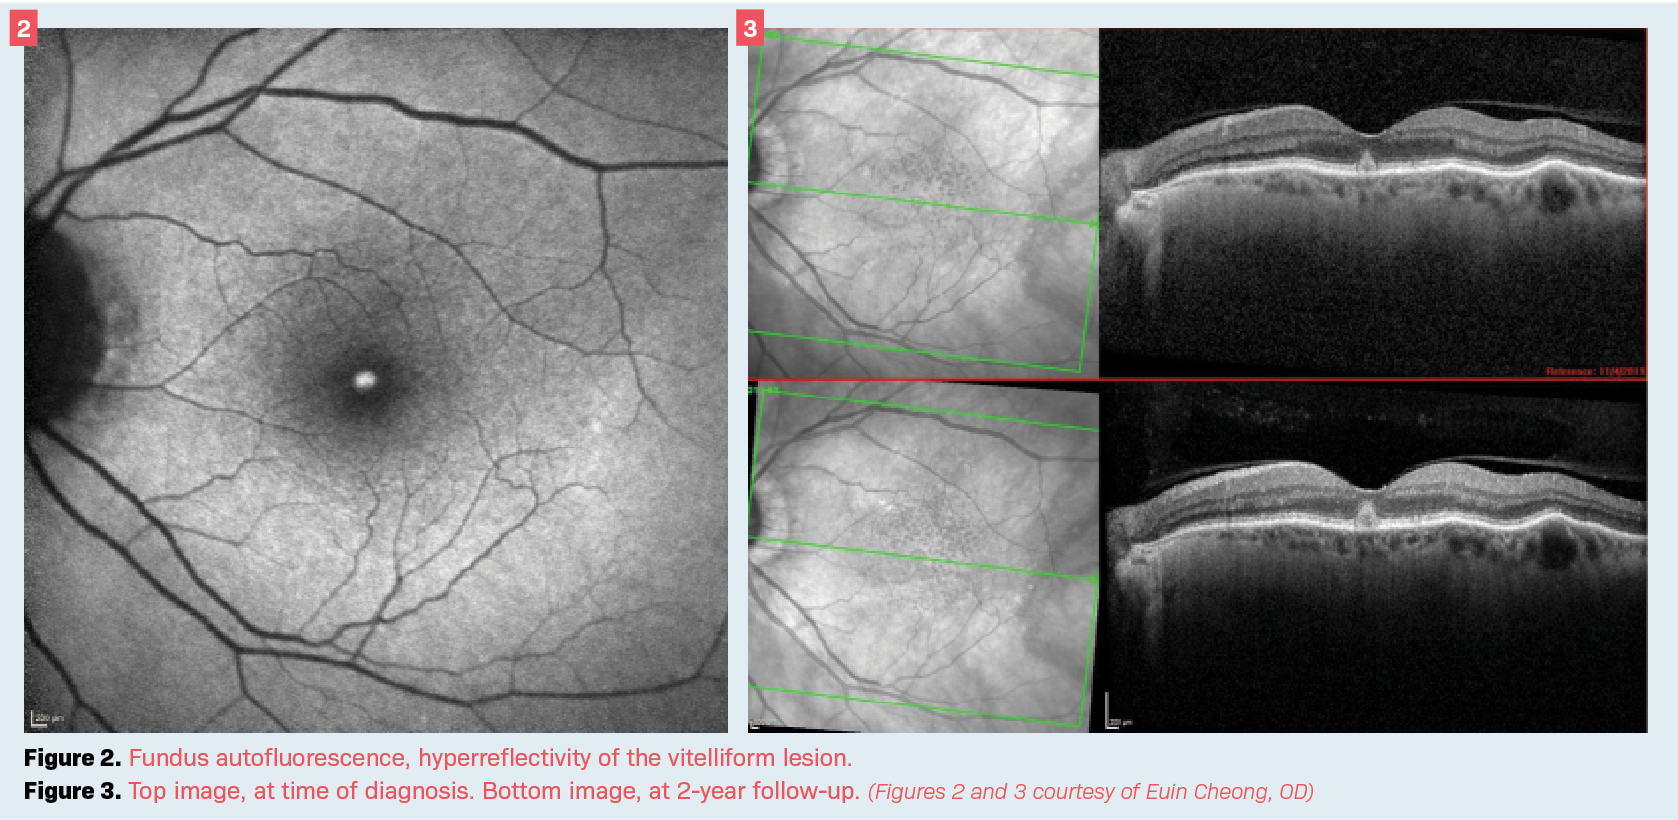 Figure 2. Fundus autofluorescence, hyperreflectivity of the vitelliform lesion.  Figure 3. Top image, at time of diagnosis. Bottom image, at 2-year follow-up. (Figures 2 and 3 courtesy of Euin Cheong, OD)